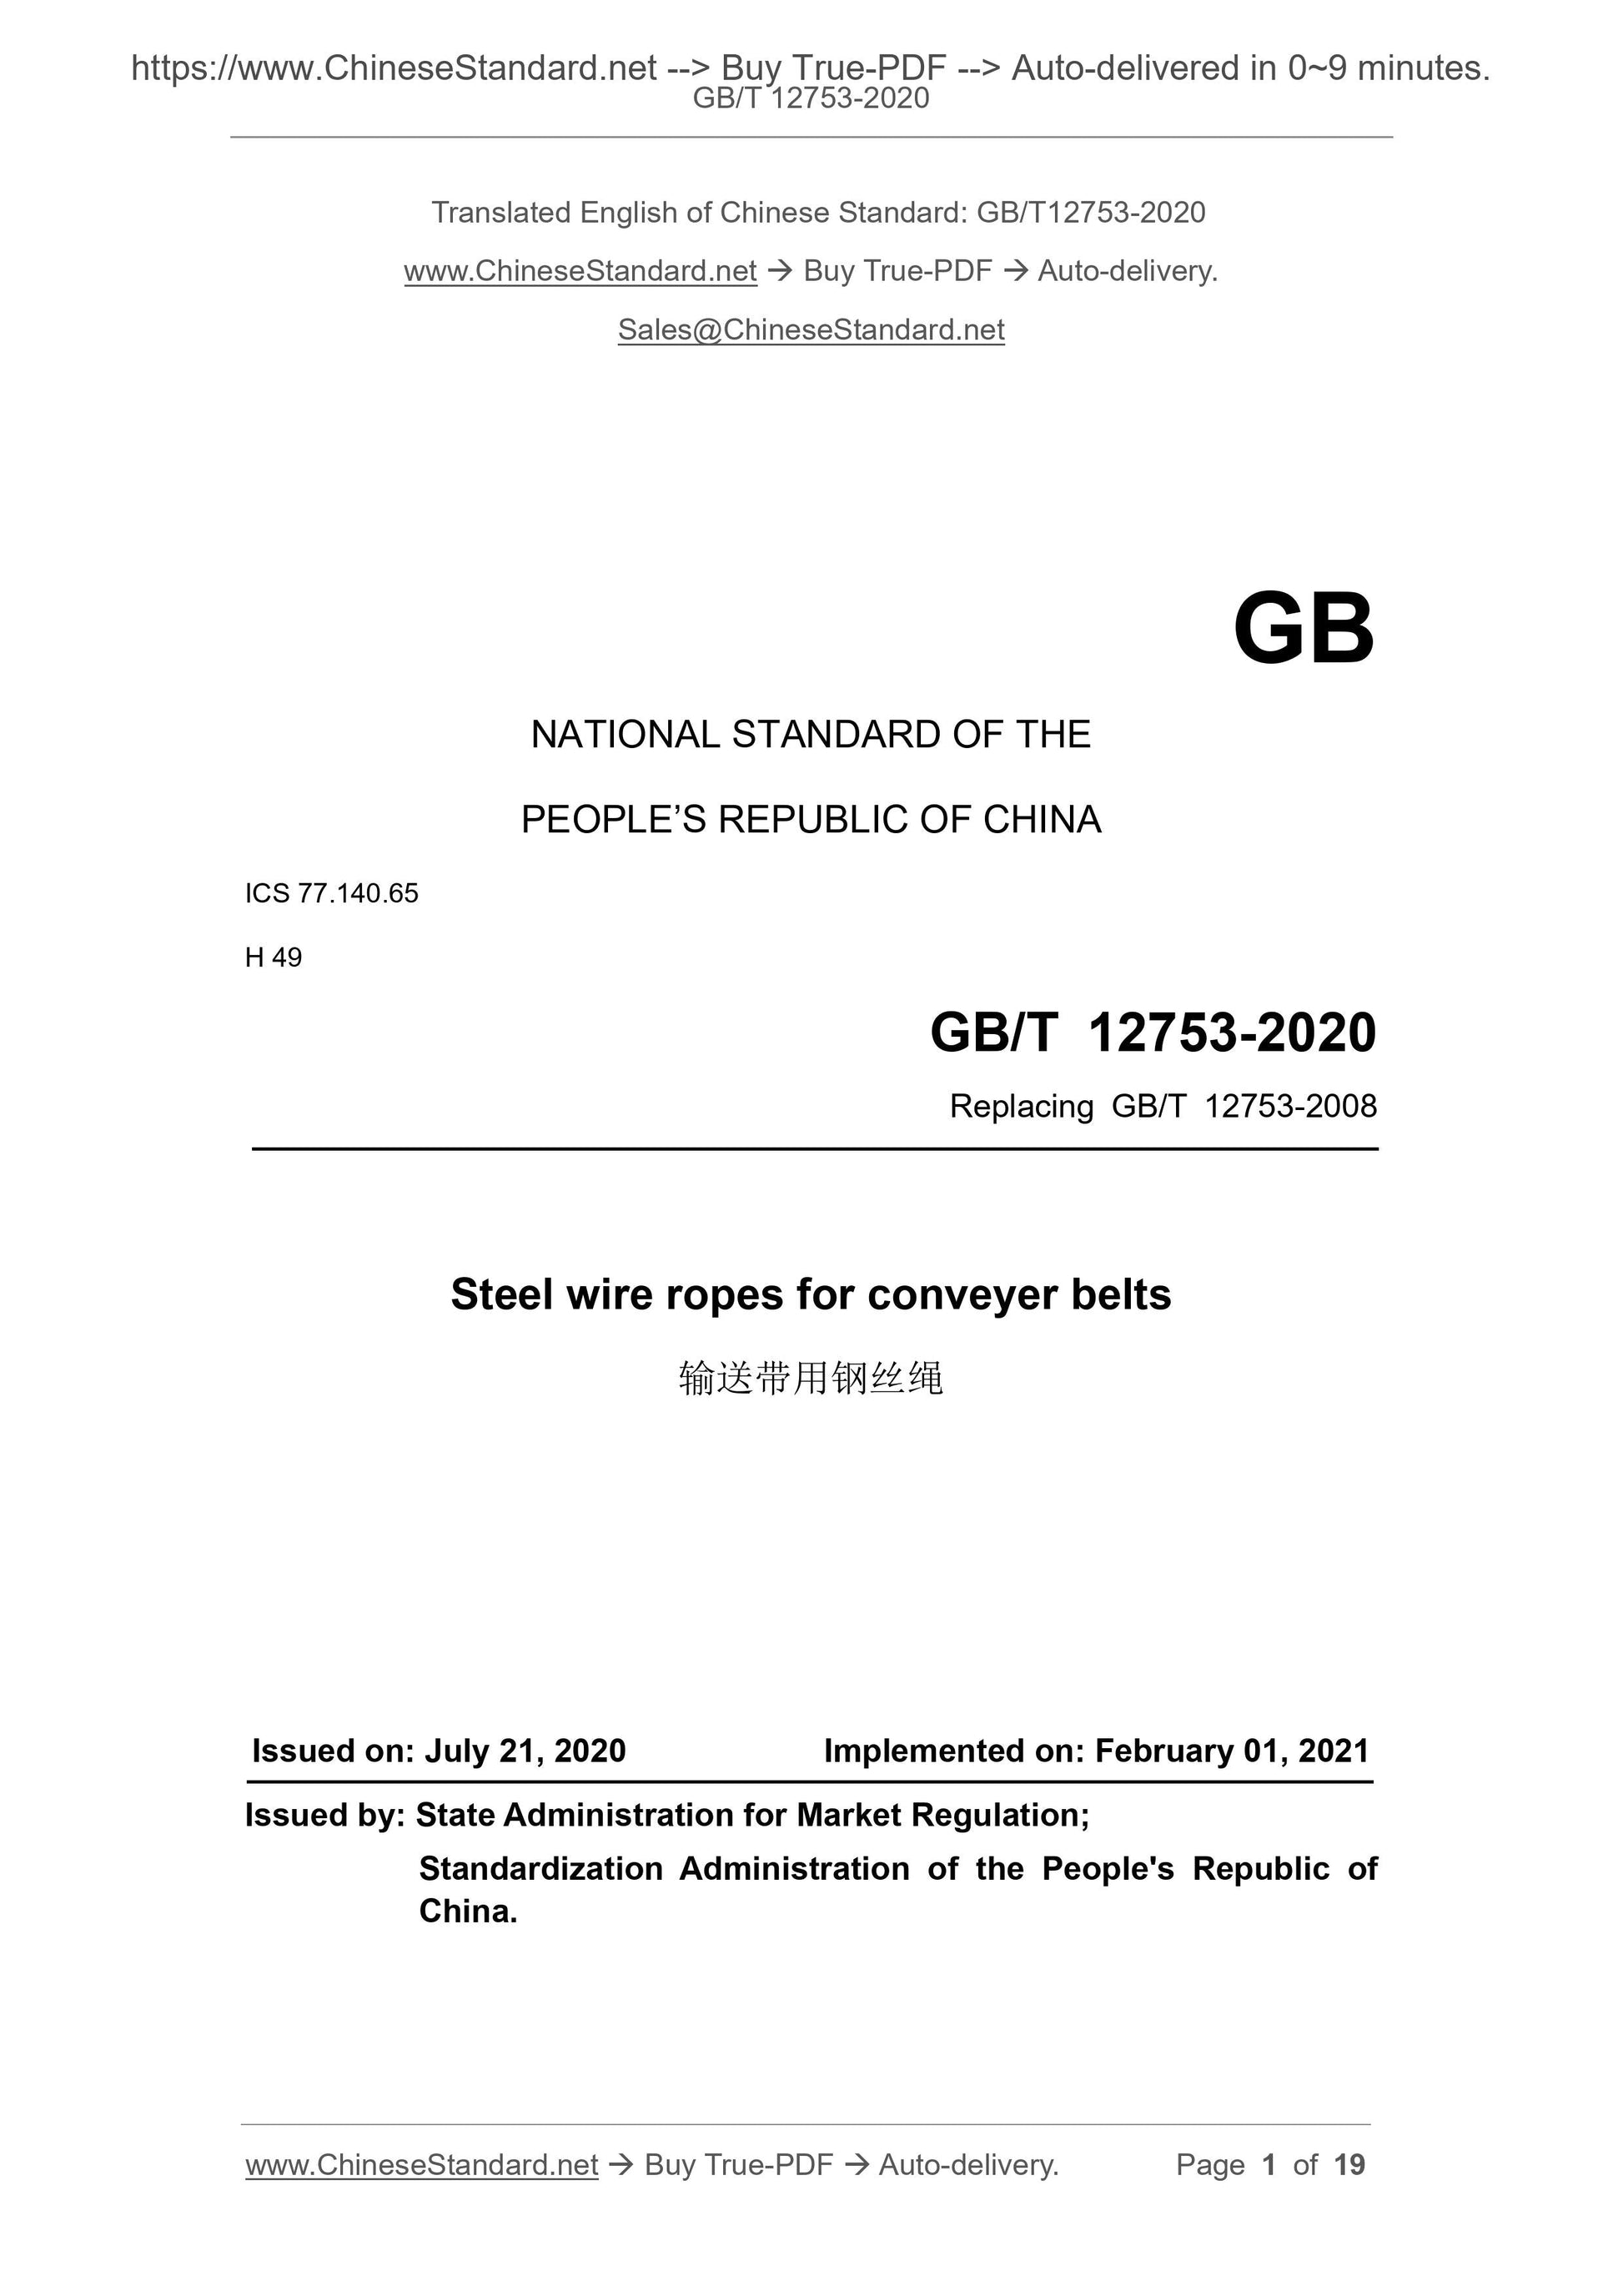 GB/T 12753-2020 Page 1